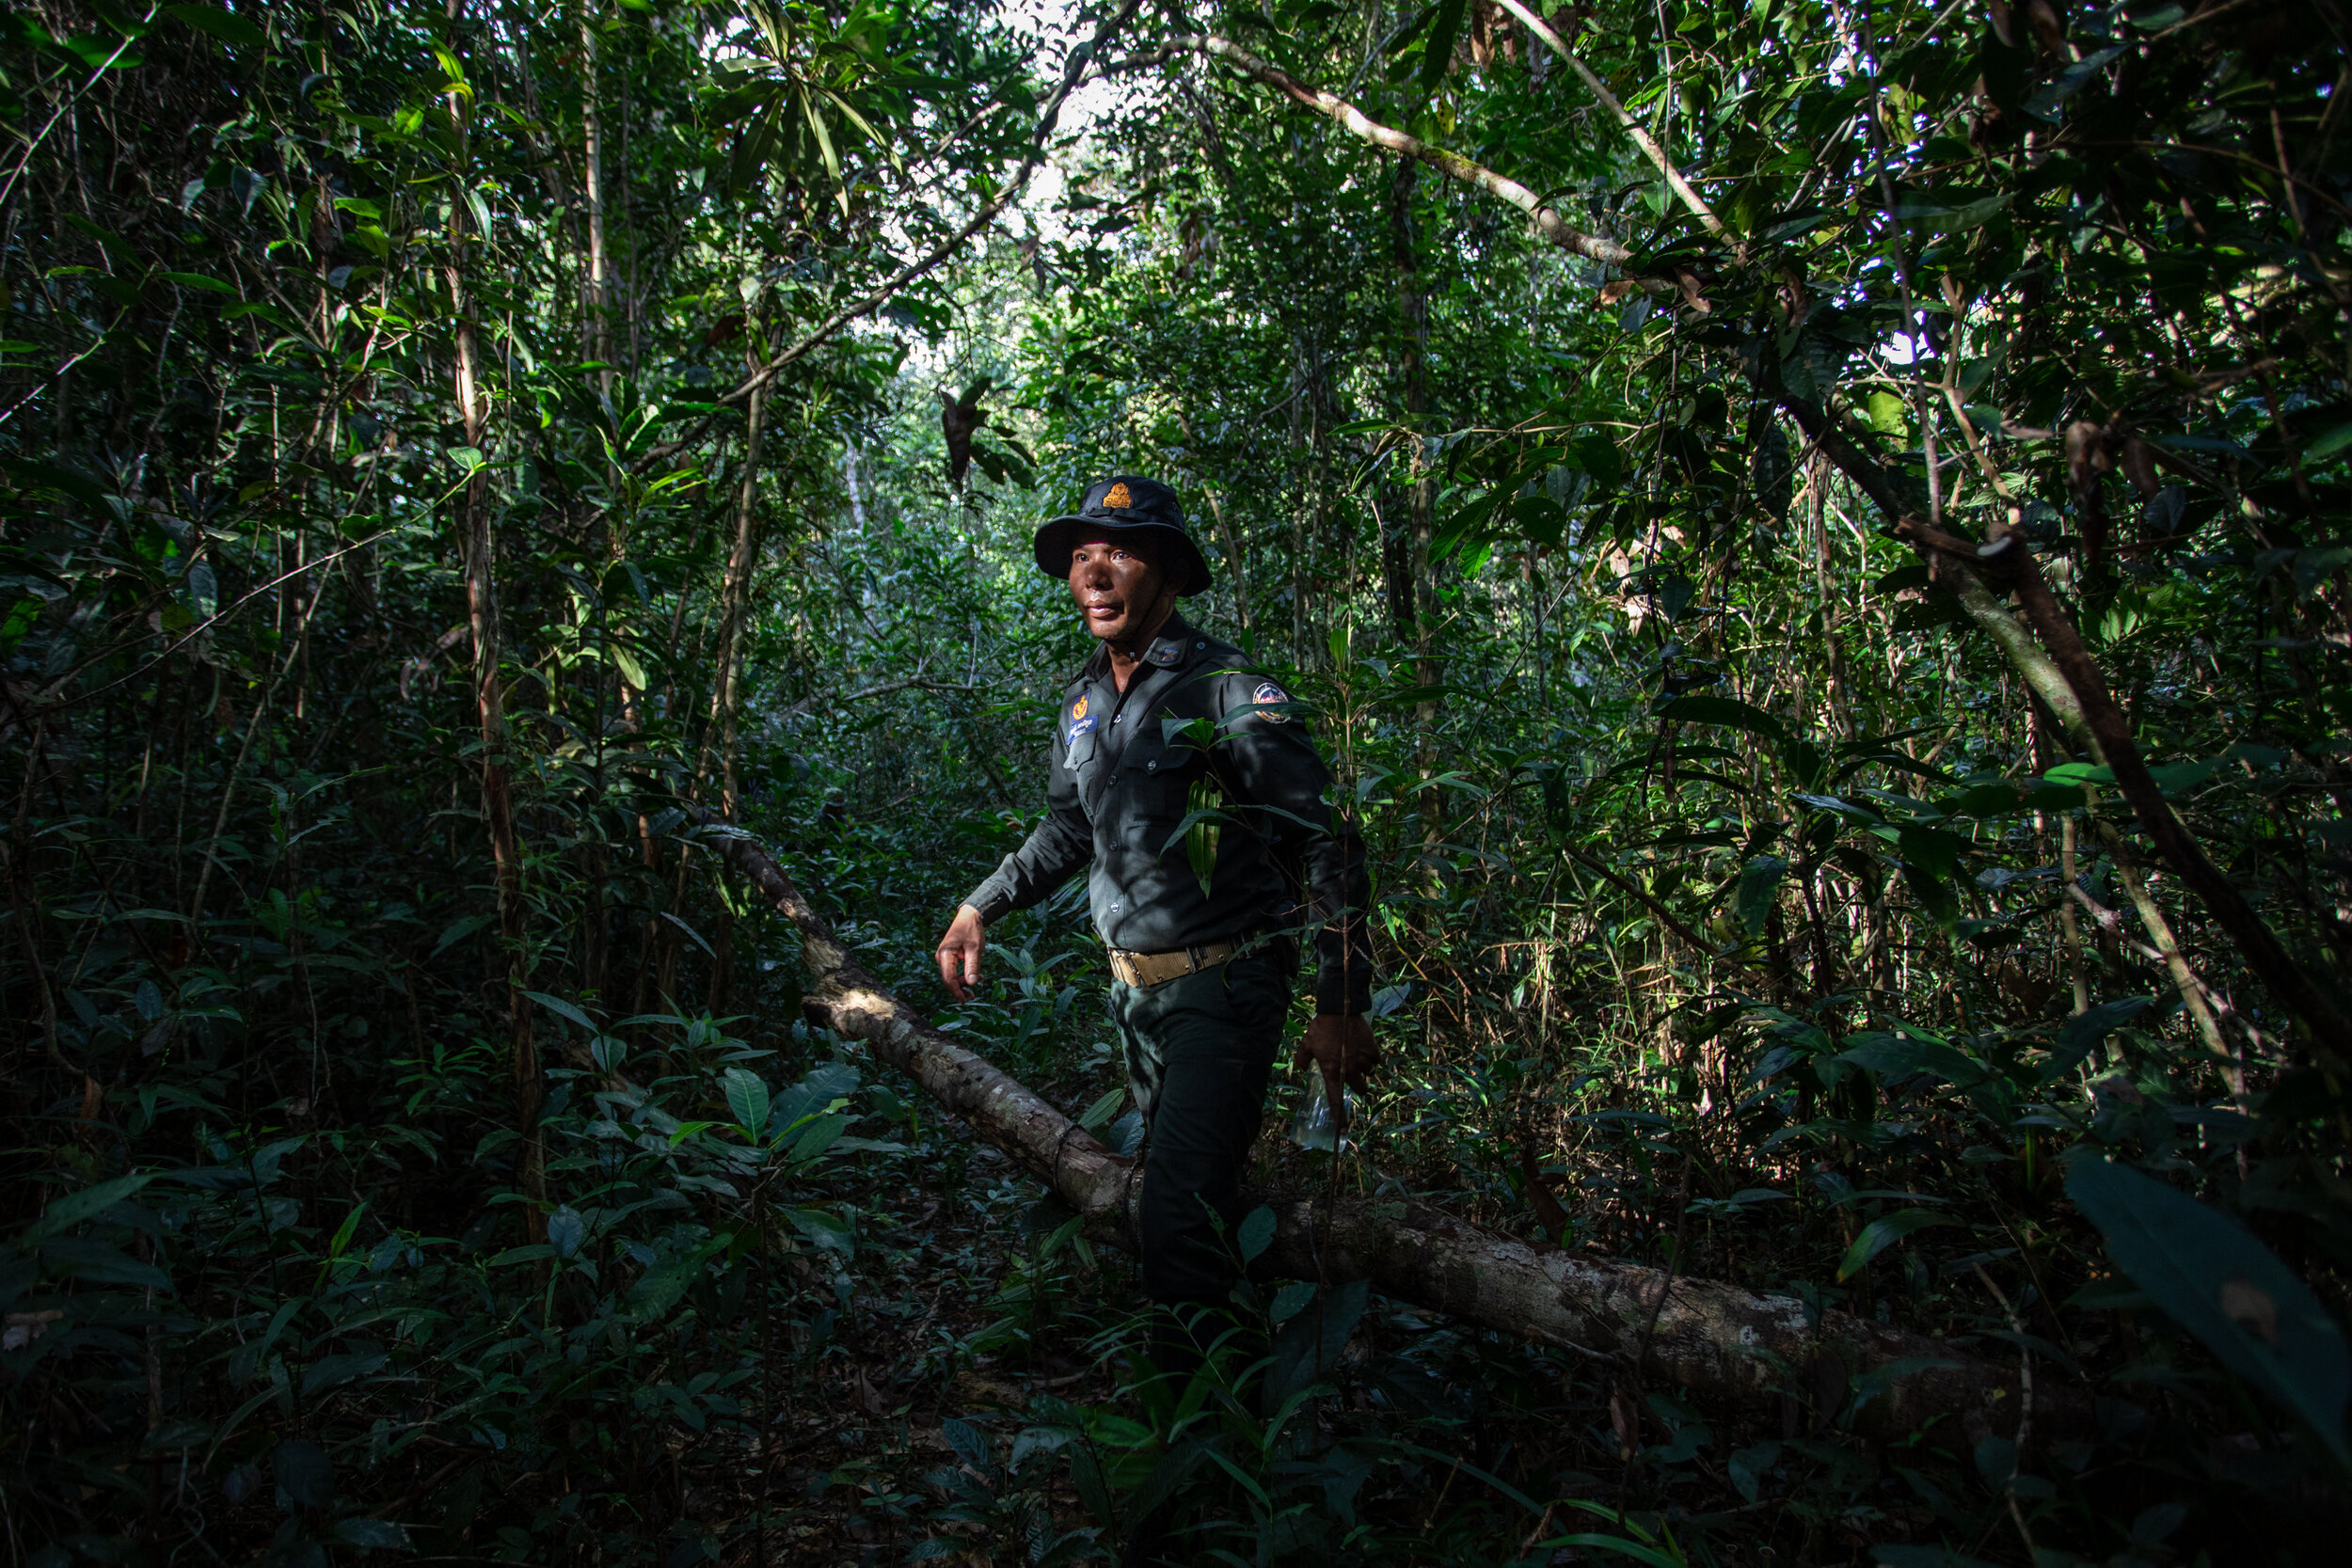  Ranger San Salem, 42, on a foot patrol deep inside the Cardamom Forest. This day's mission was tracking fresh signs of illegal loggers. While moving quickly through the forest, the patrol kept silent, listening for the sound of chainsaws in the dist